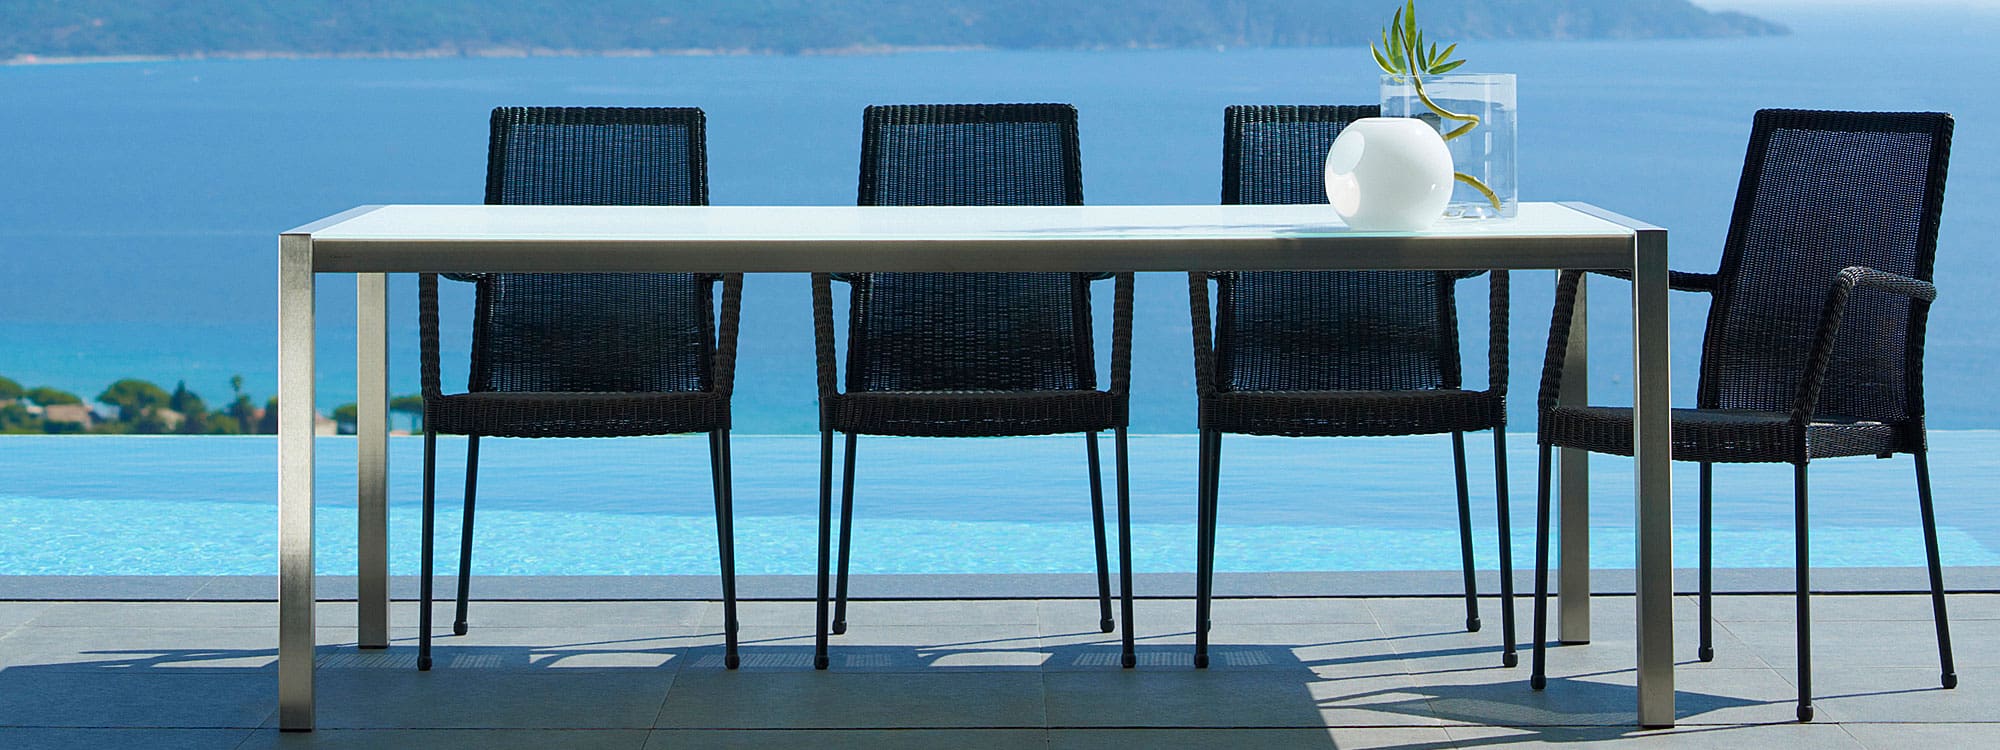 Image of Newport black rattan garden armchairs around Cane-line dining table, shown on poolside